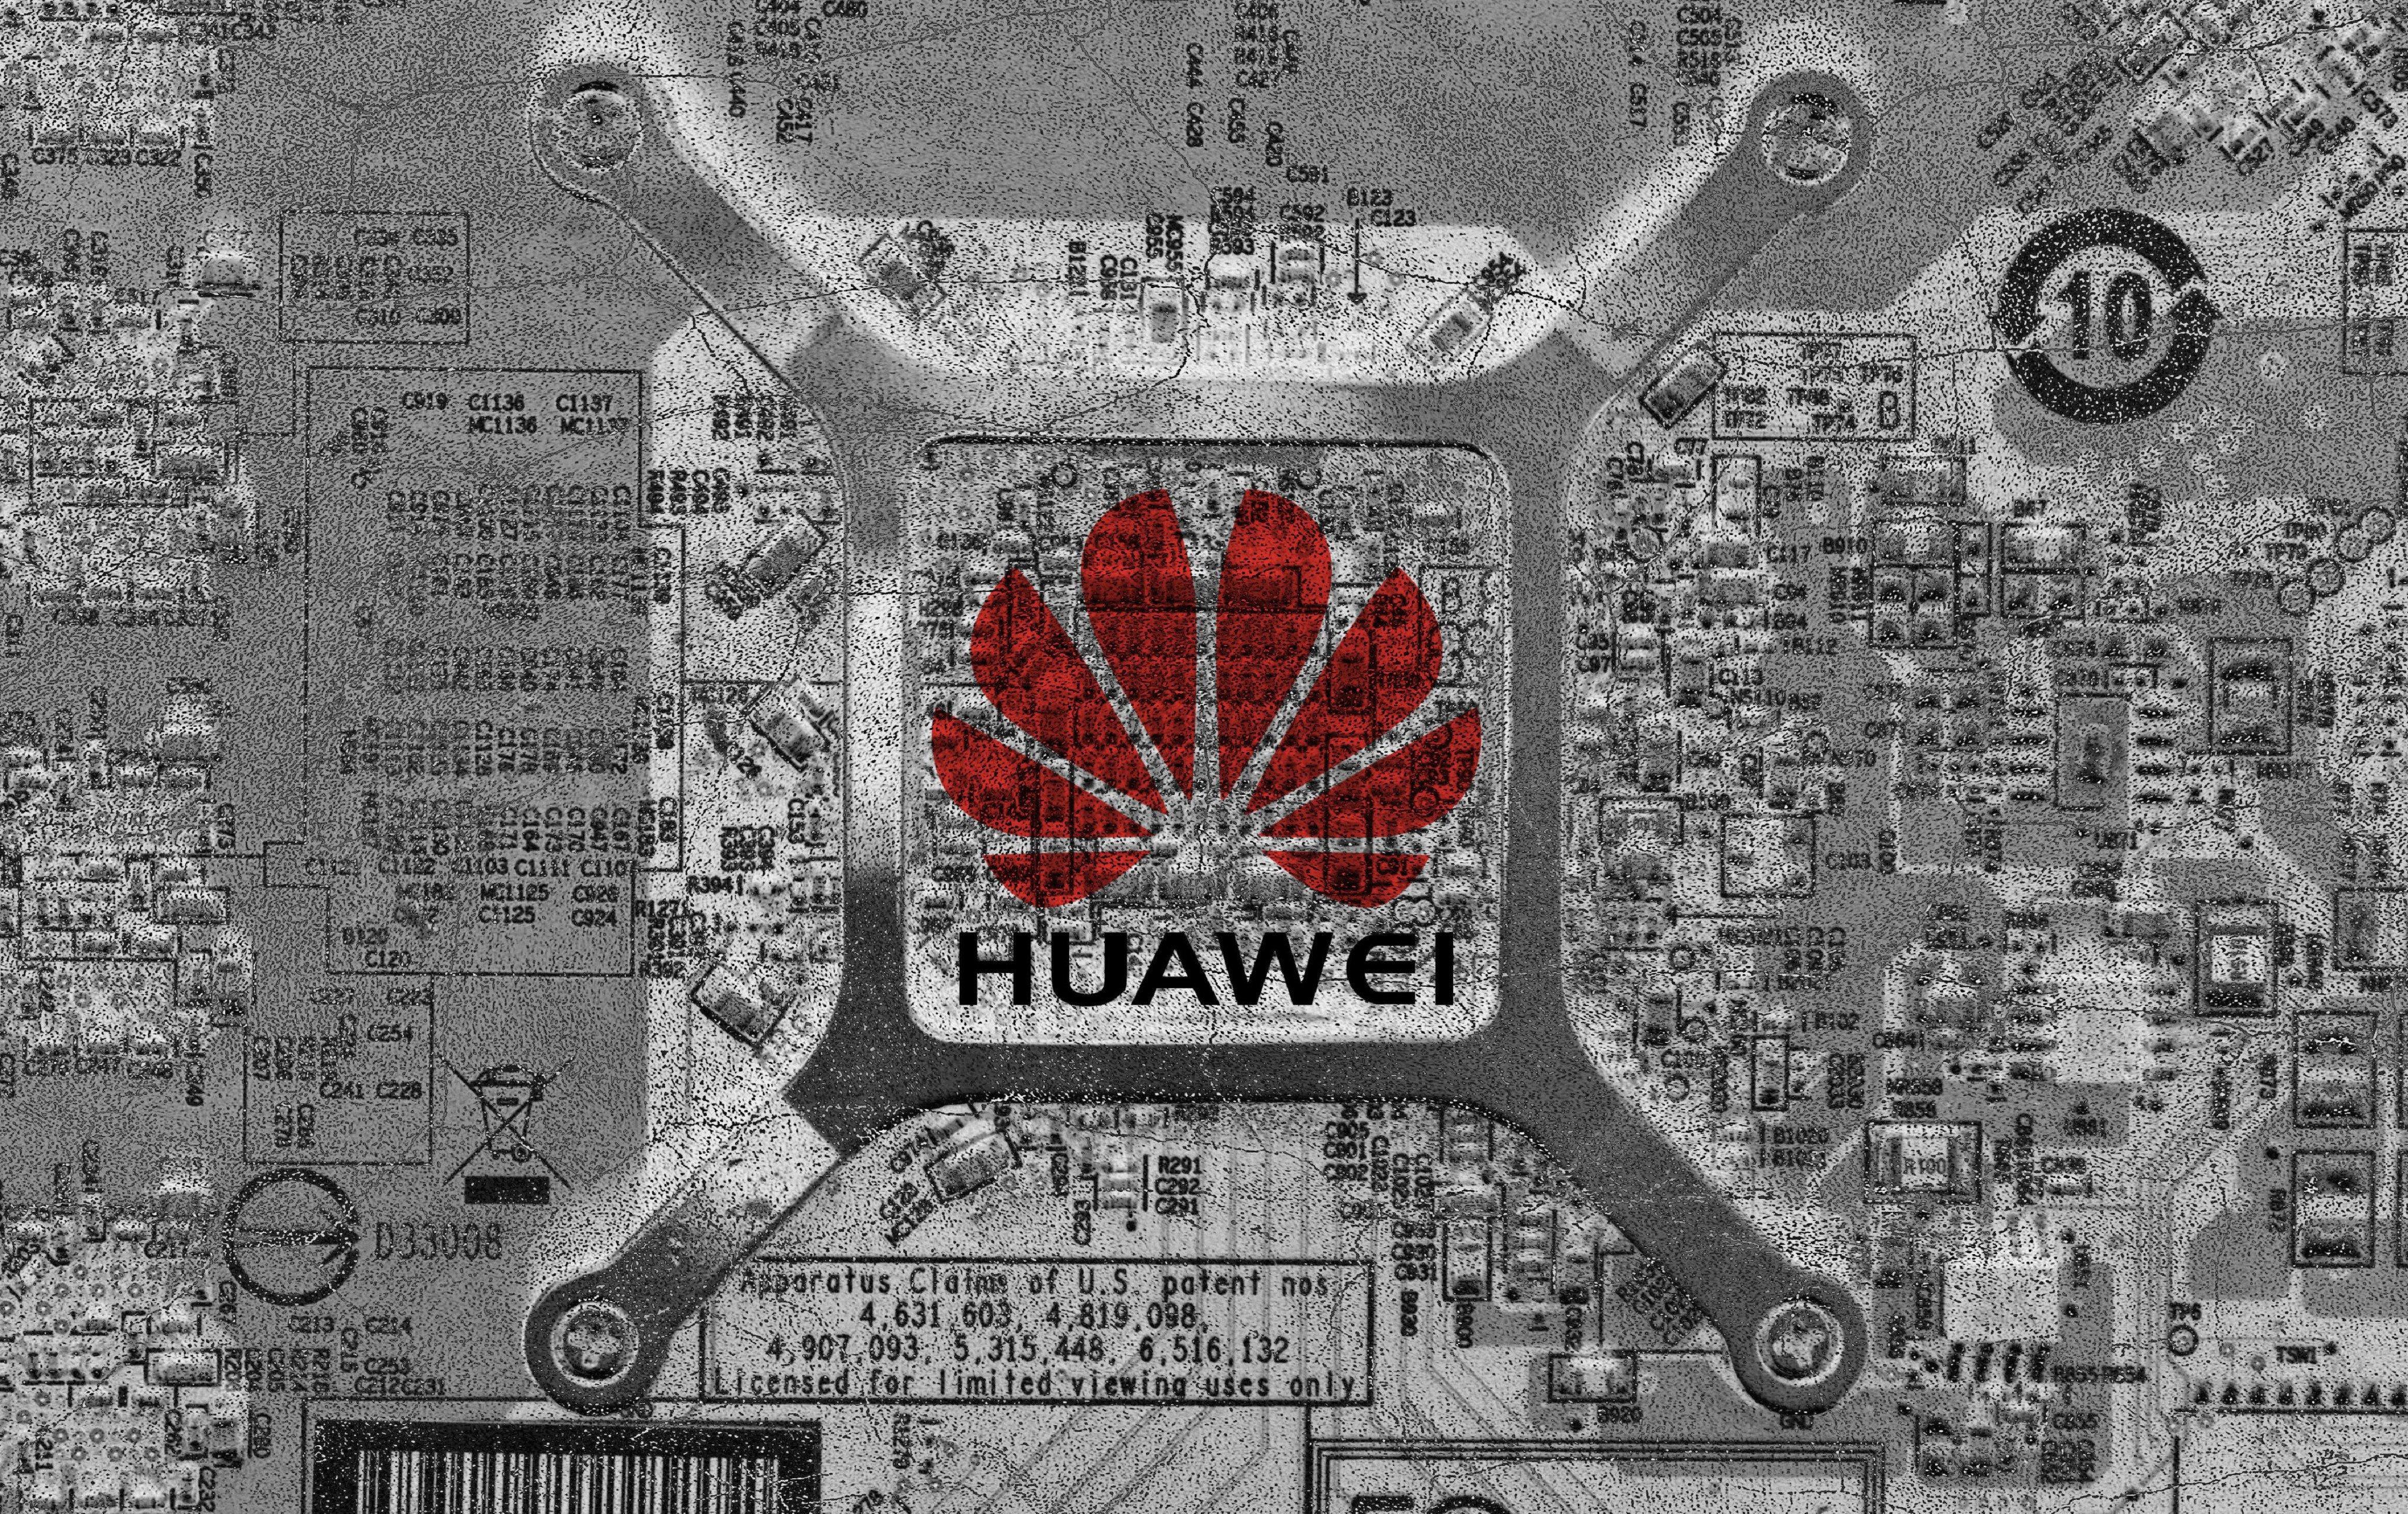 Fresh US sanctions on Huawei Technologies’ chip supply chain would ratchet up the pressure on the firm, months after it made a comeback to the 5G smartphone market with an advanced processor. Photo: Shutterstock